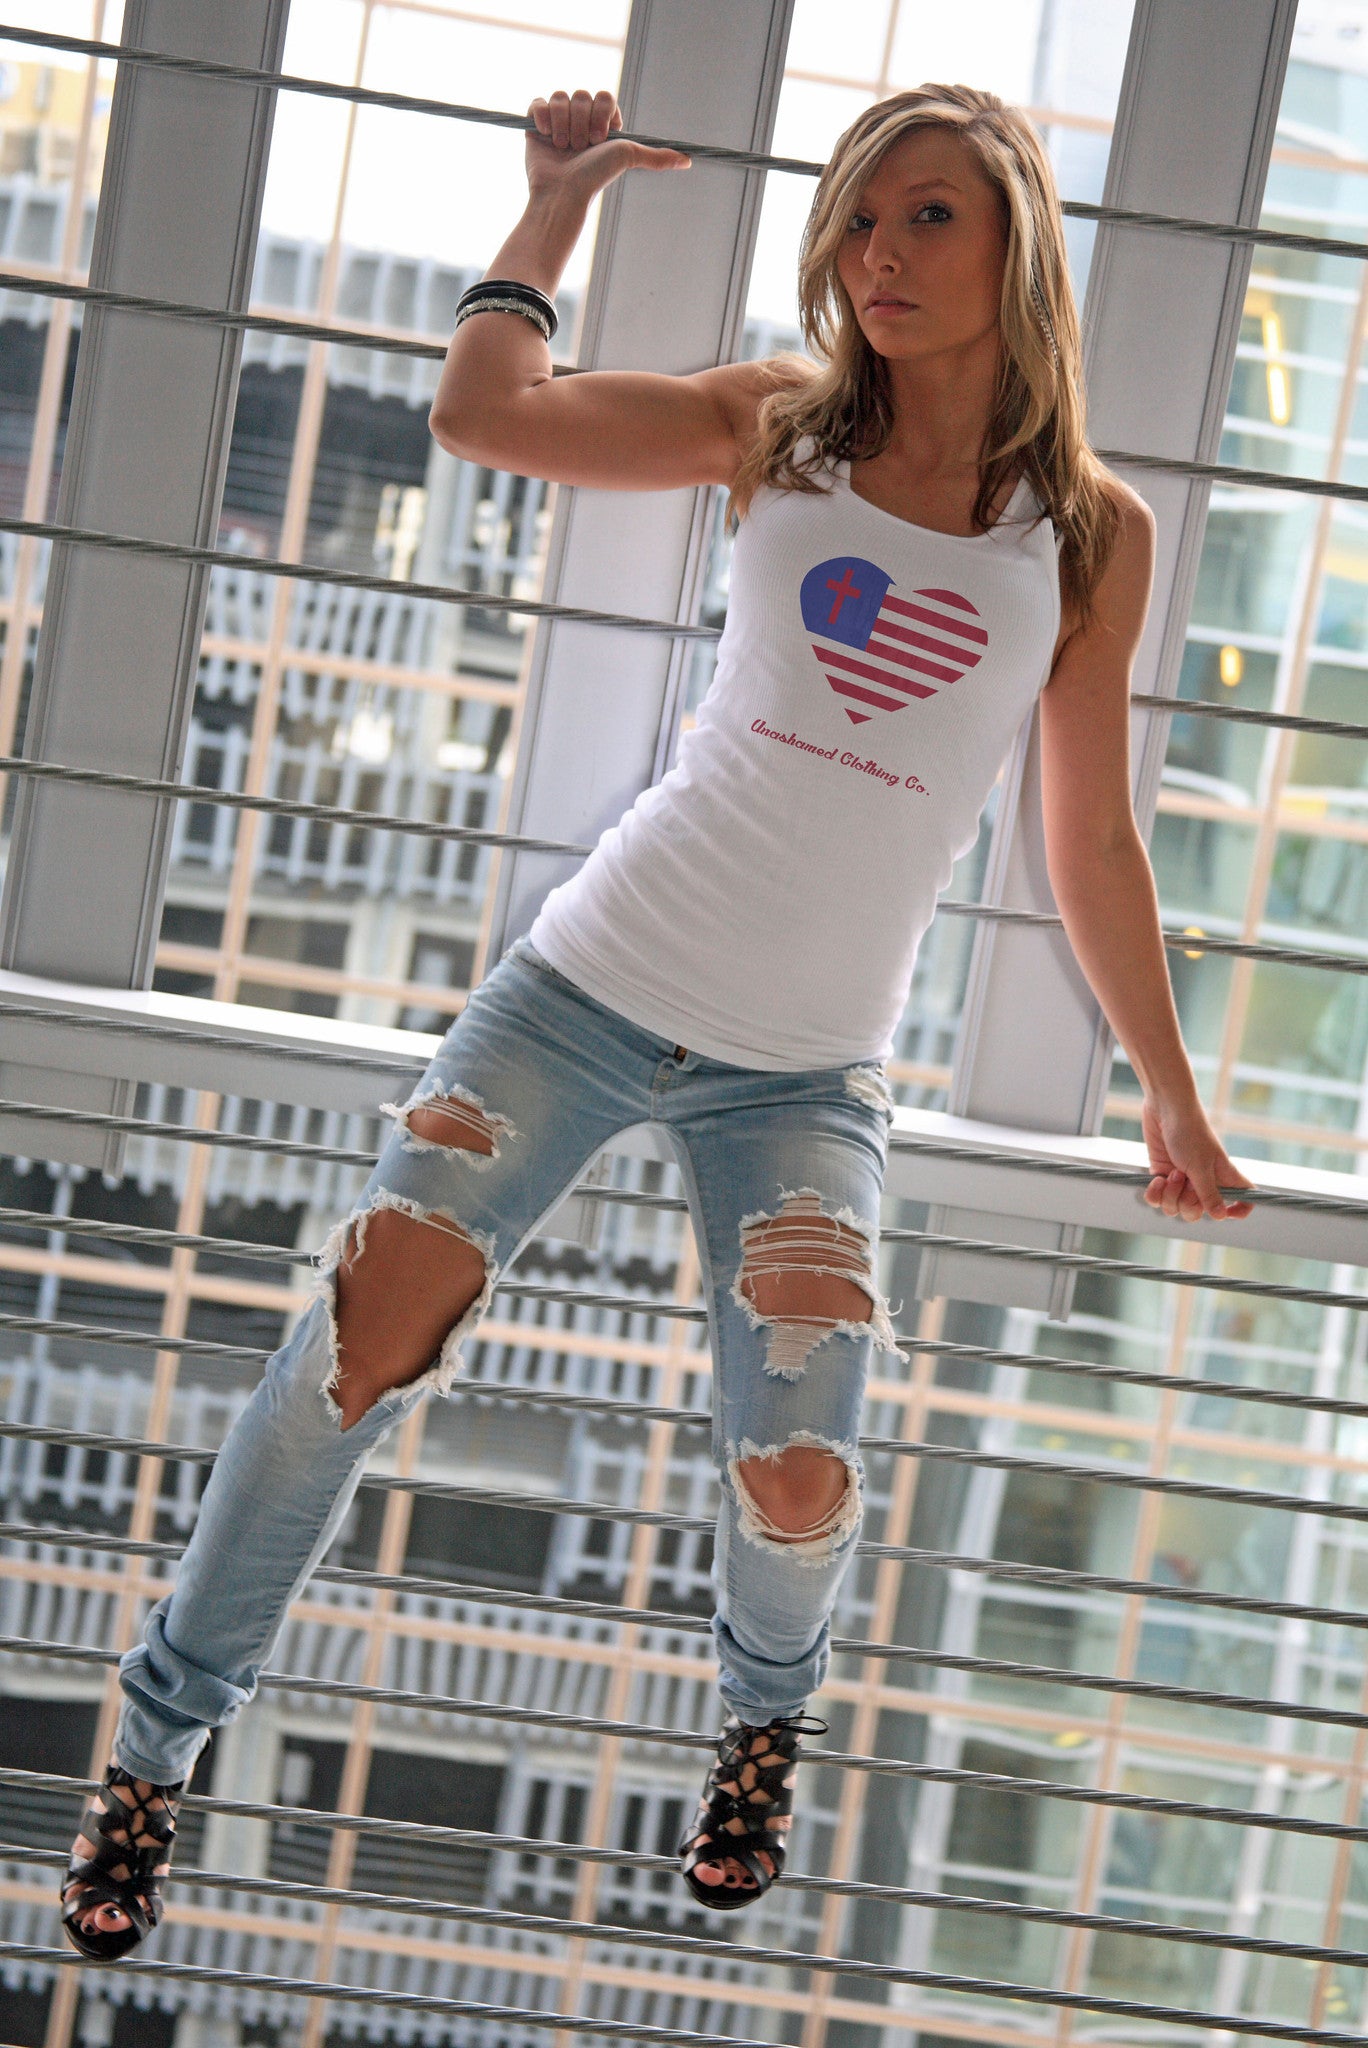 God and Country Ladies Tank